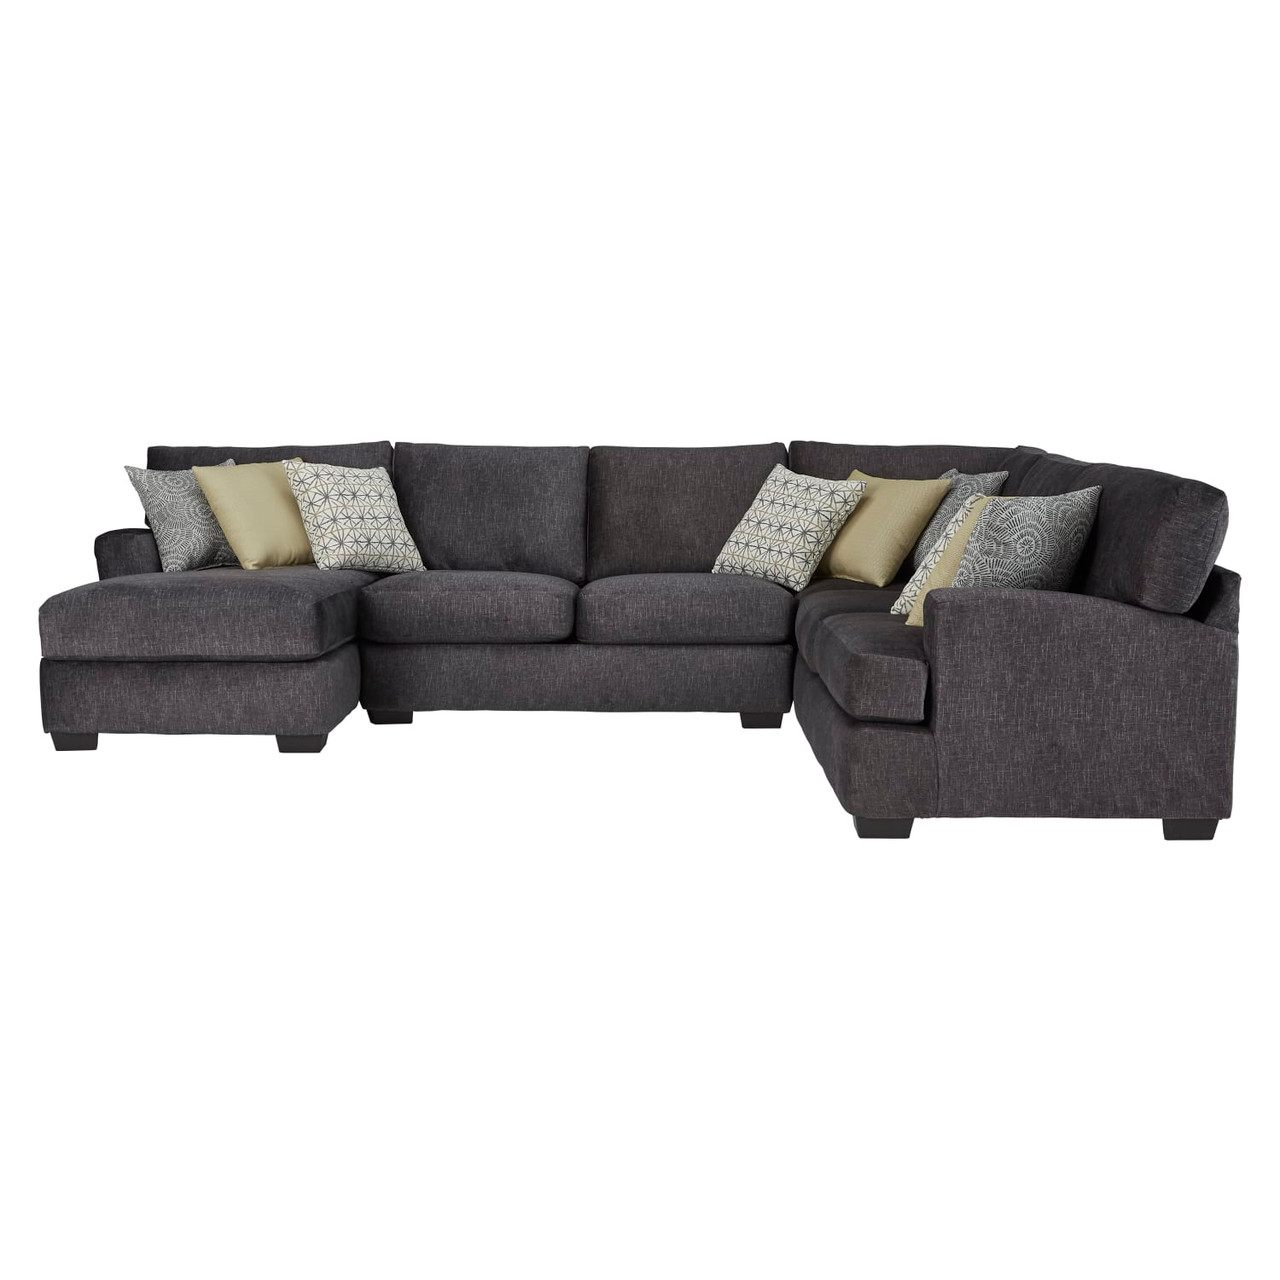 Boulevard Sectional - Right Side Facing Corner Sofa, Armless Loveseat, and Left Side Facing Chaise